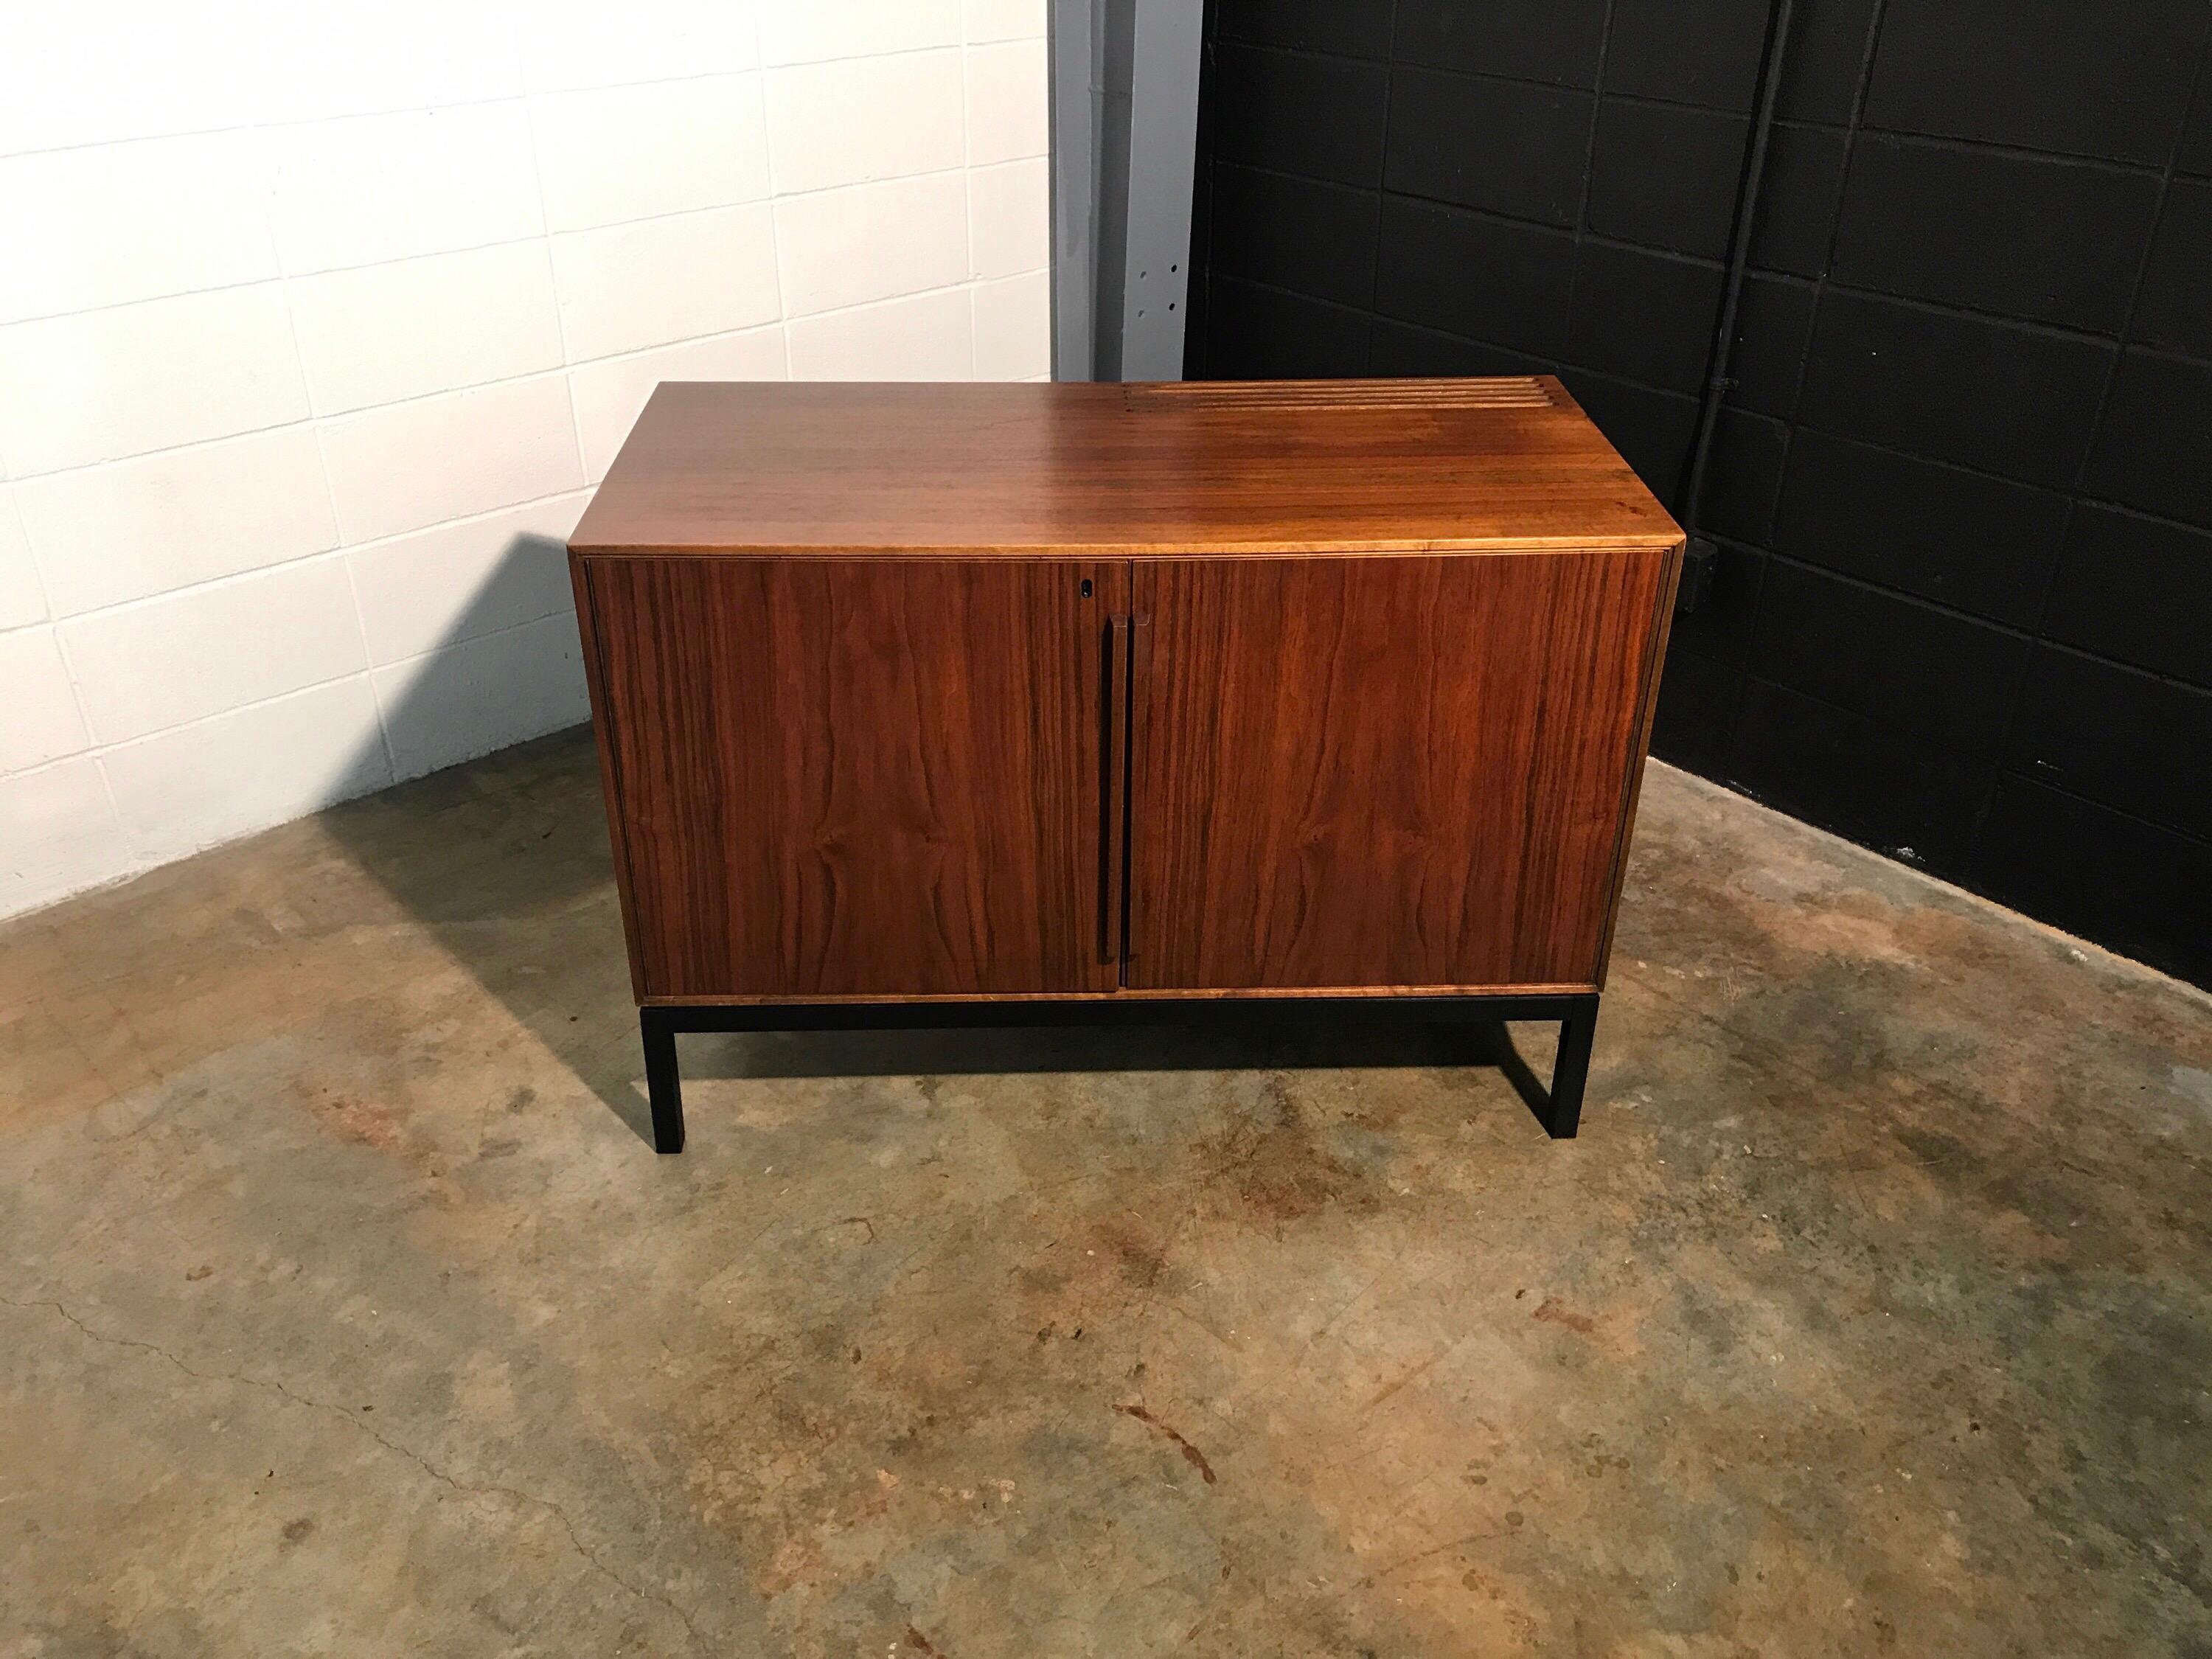 Rare to see Mid-Century Modern two-door cabinet with built-in refrigerator. Beautiful walnut cabinet features slim sculpted handles and an ebonized base. Plenty of storage on the left side with shelving to accommodate tall bottles and shelves on the